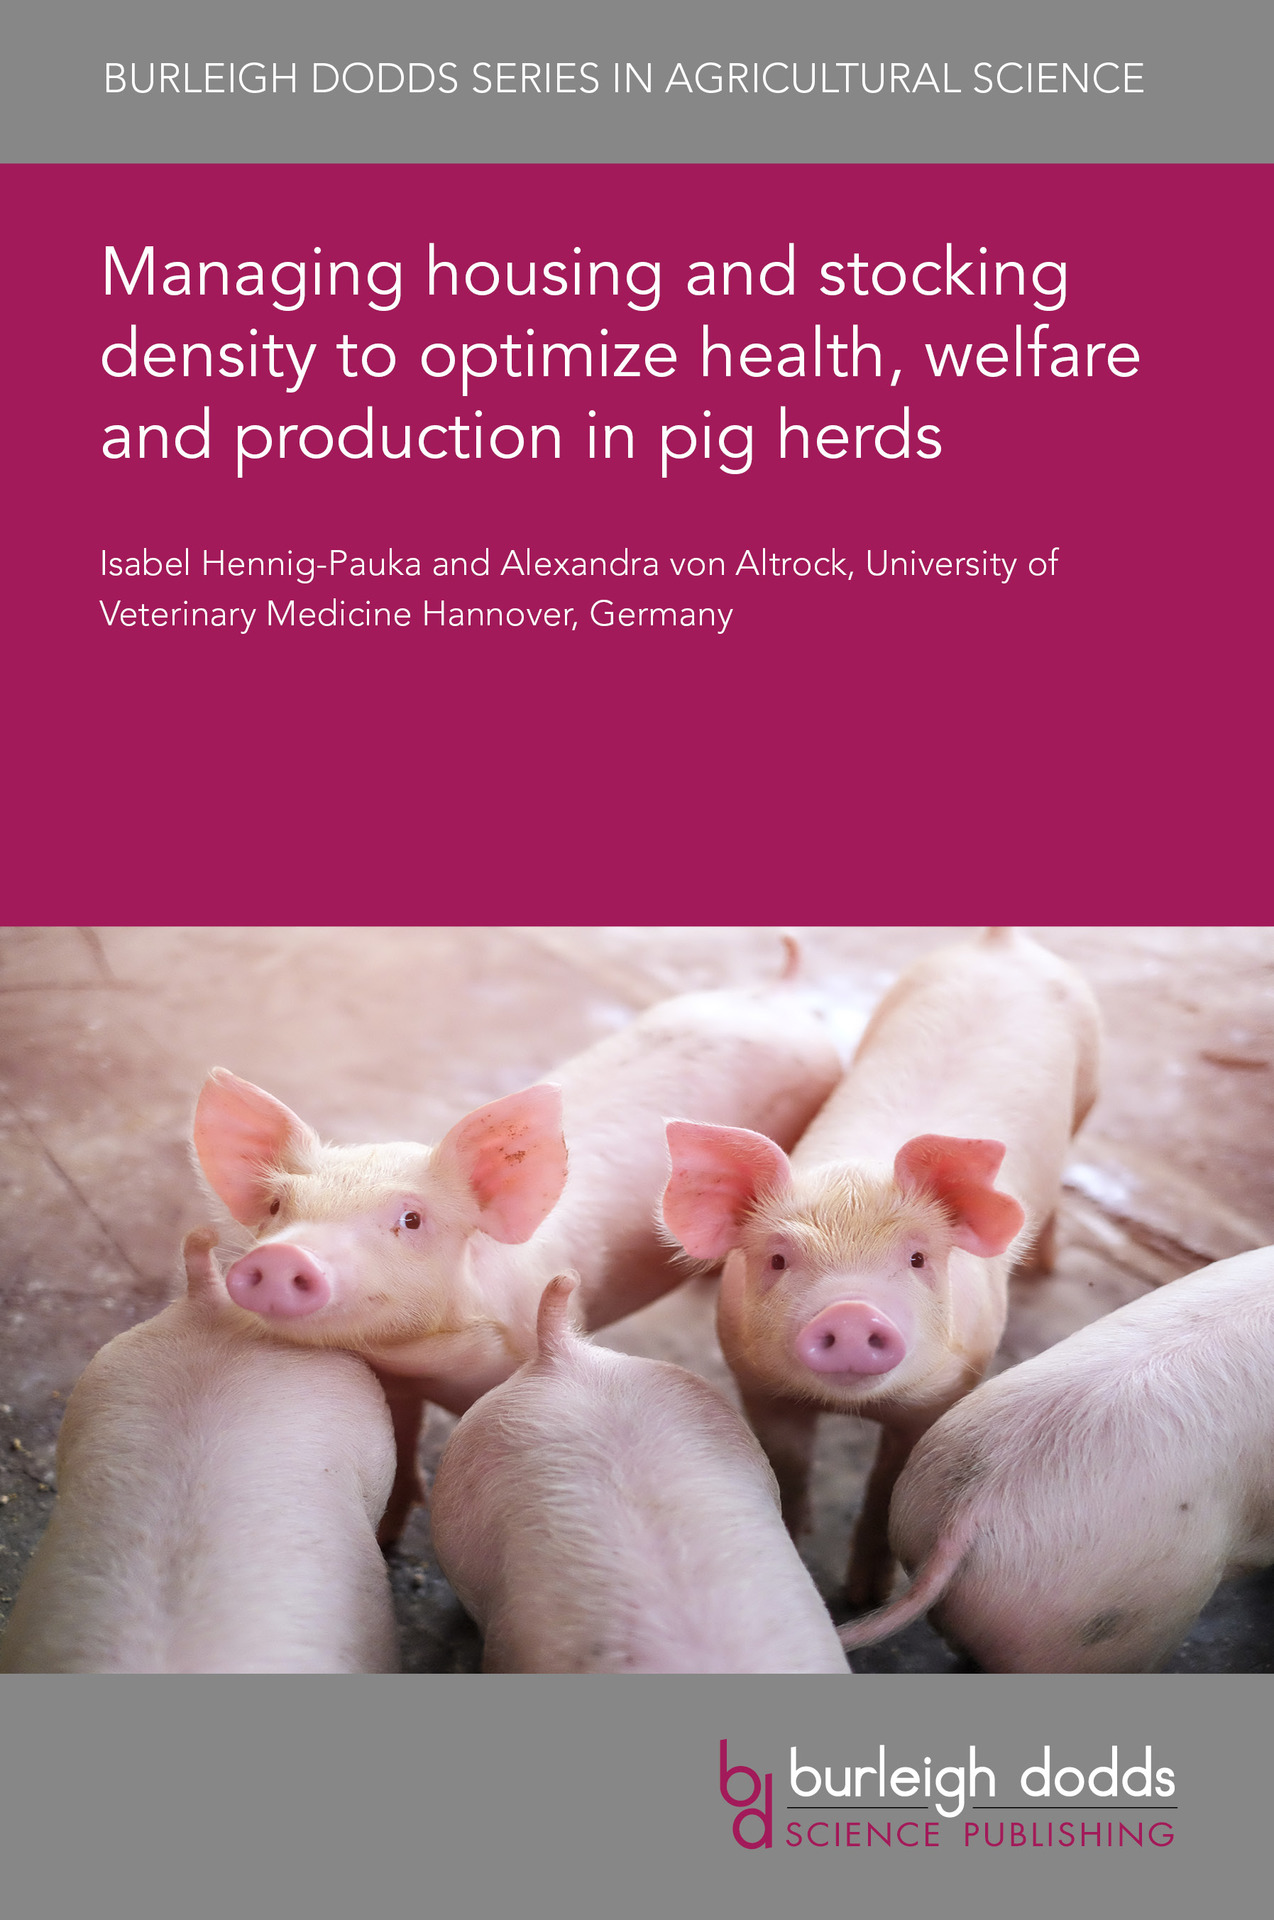 Managing housing and stocking density to optimize health, welfare and production in pig herds